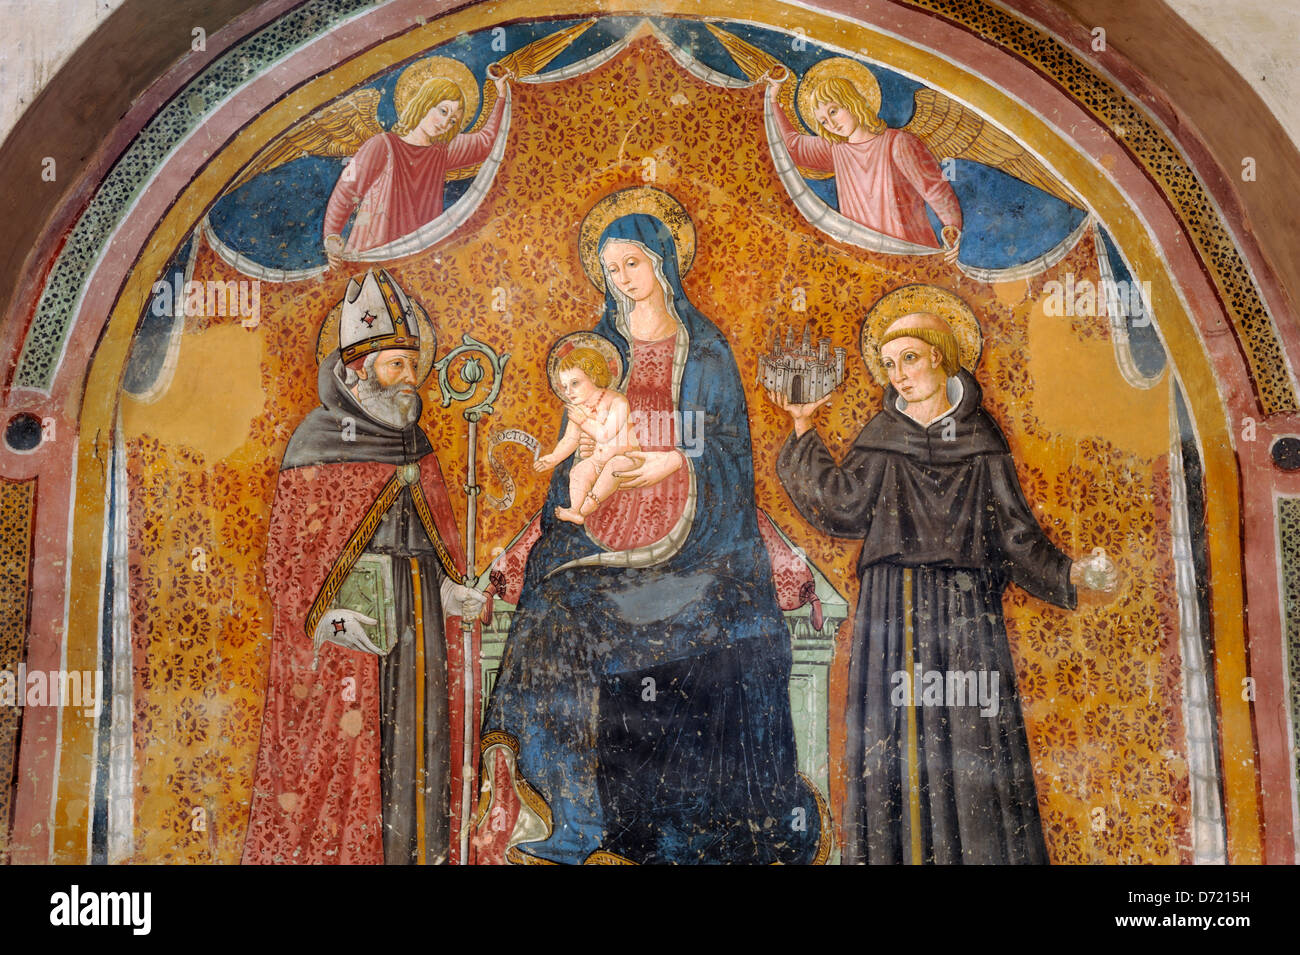 Italy, Umbria, Montefalco, church of Sant'Agostino, medieval painting Stock Photo